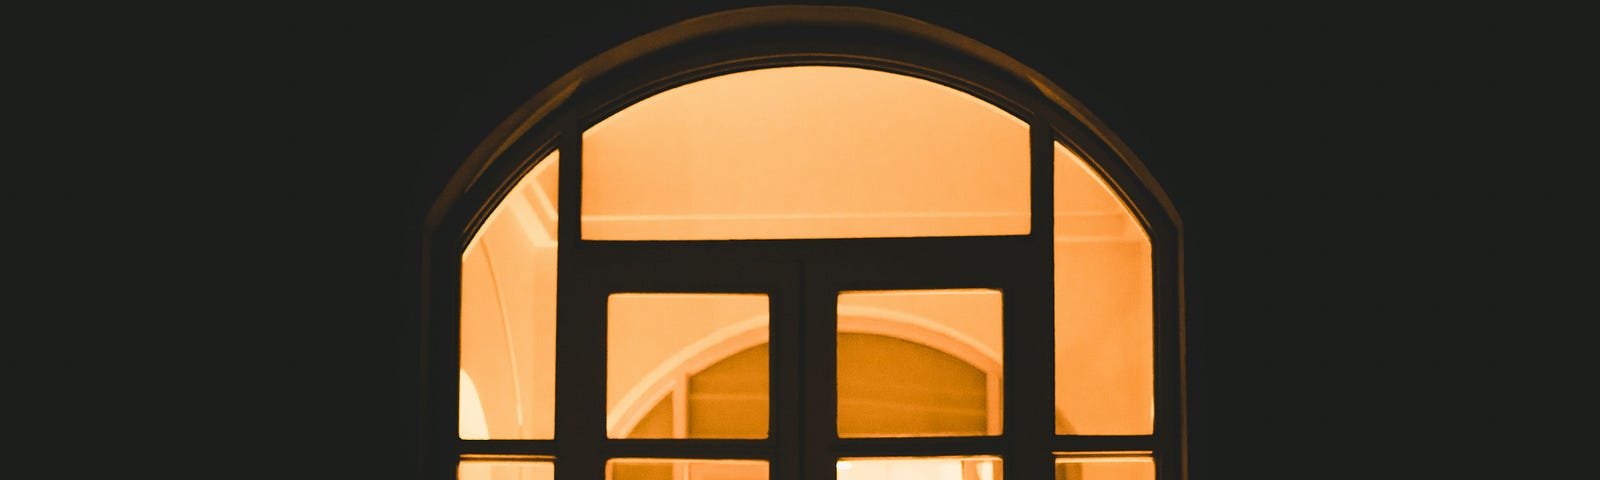 A cat silhouetted in an arched window